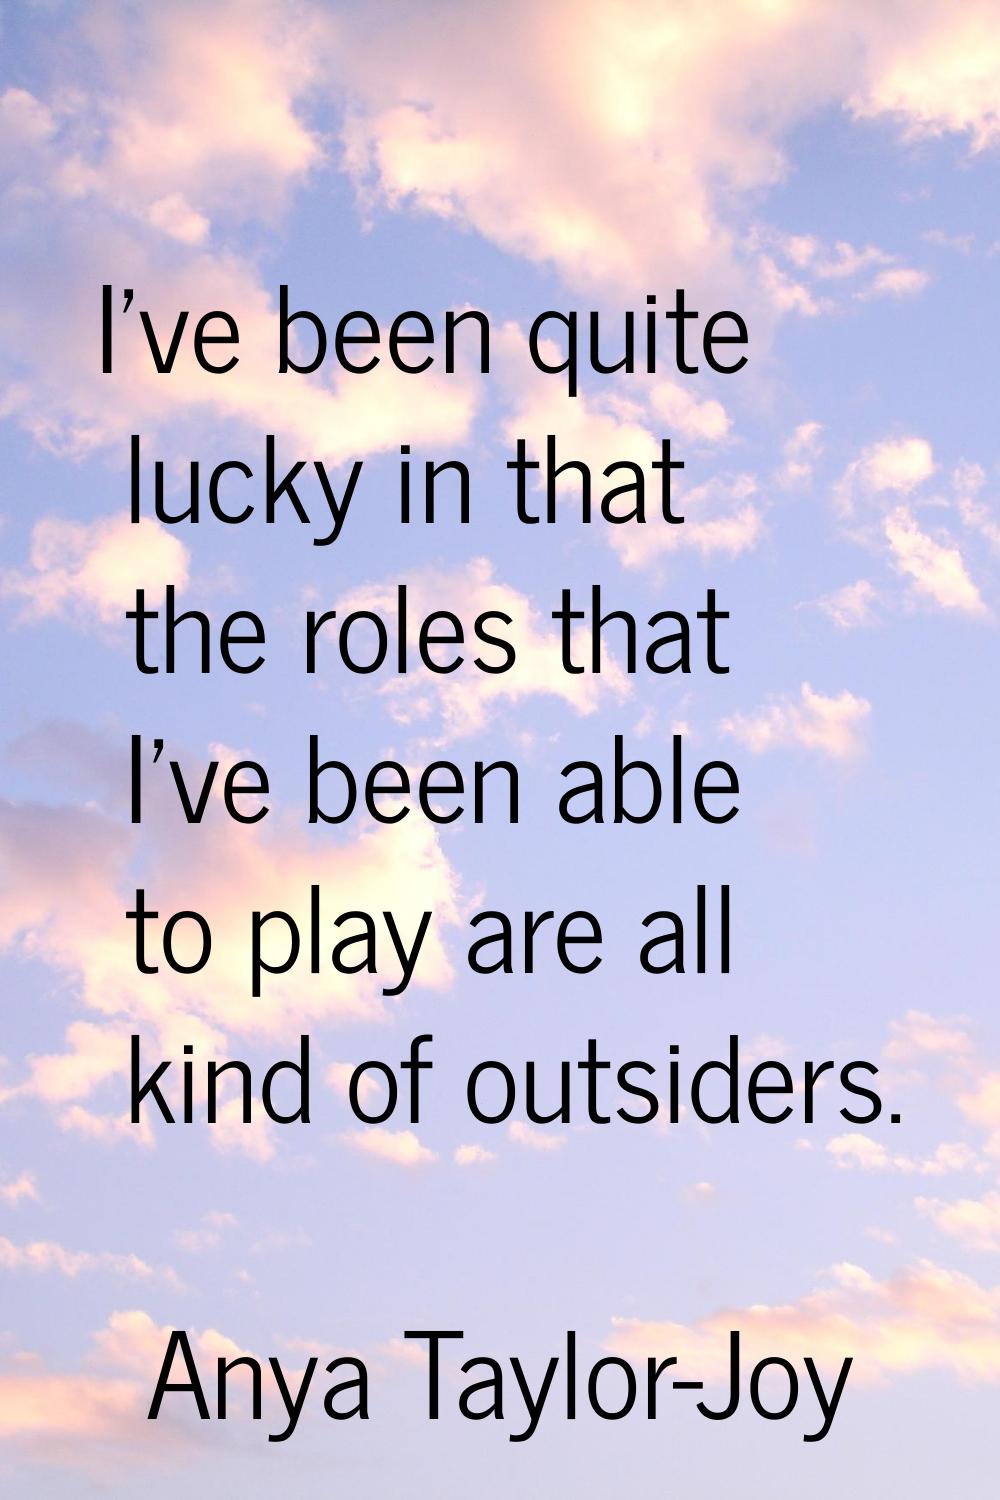 I've been quite lucky in that the roles that I've been able to play are all kind of outsiders.